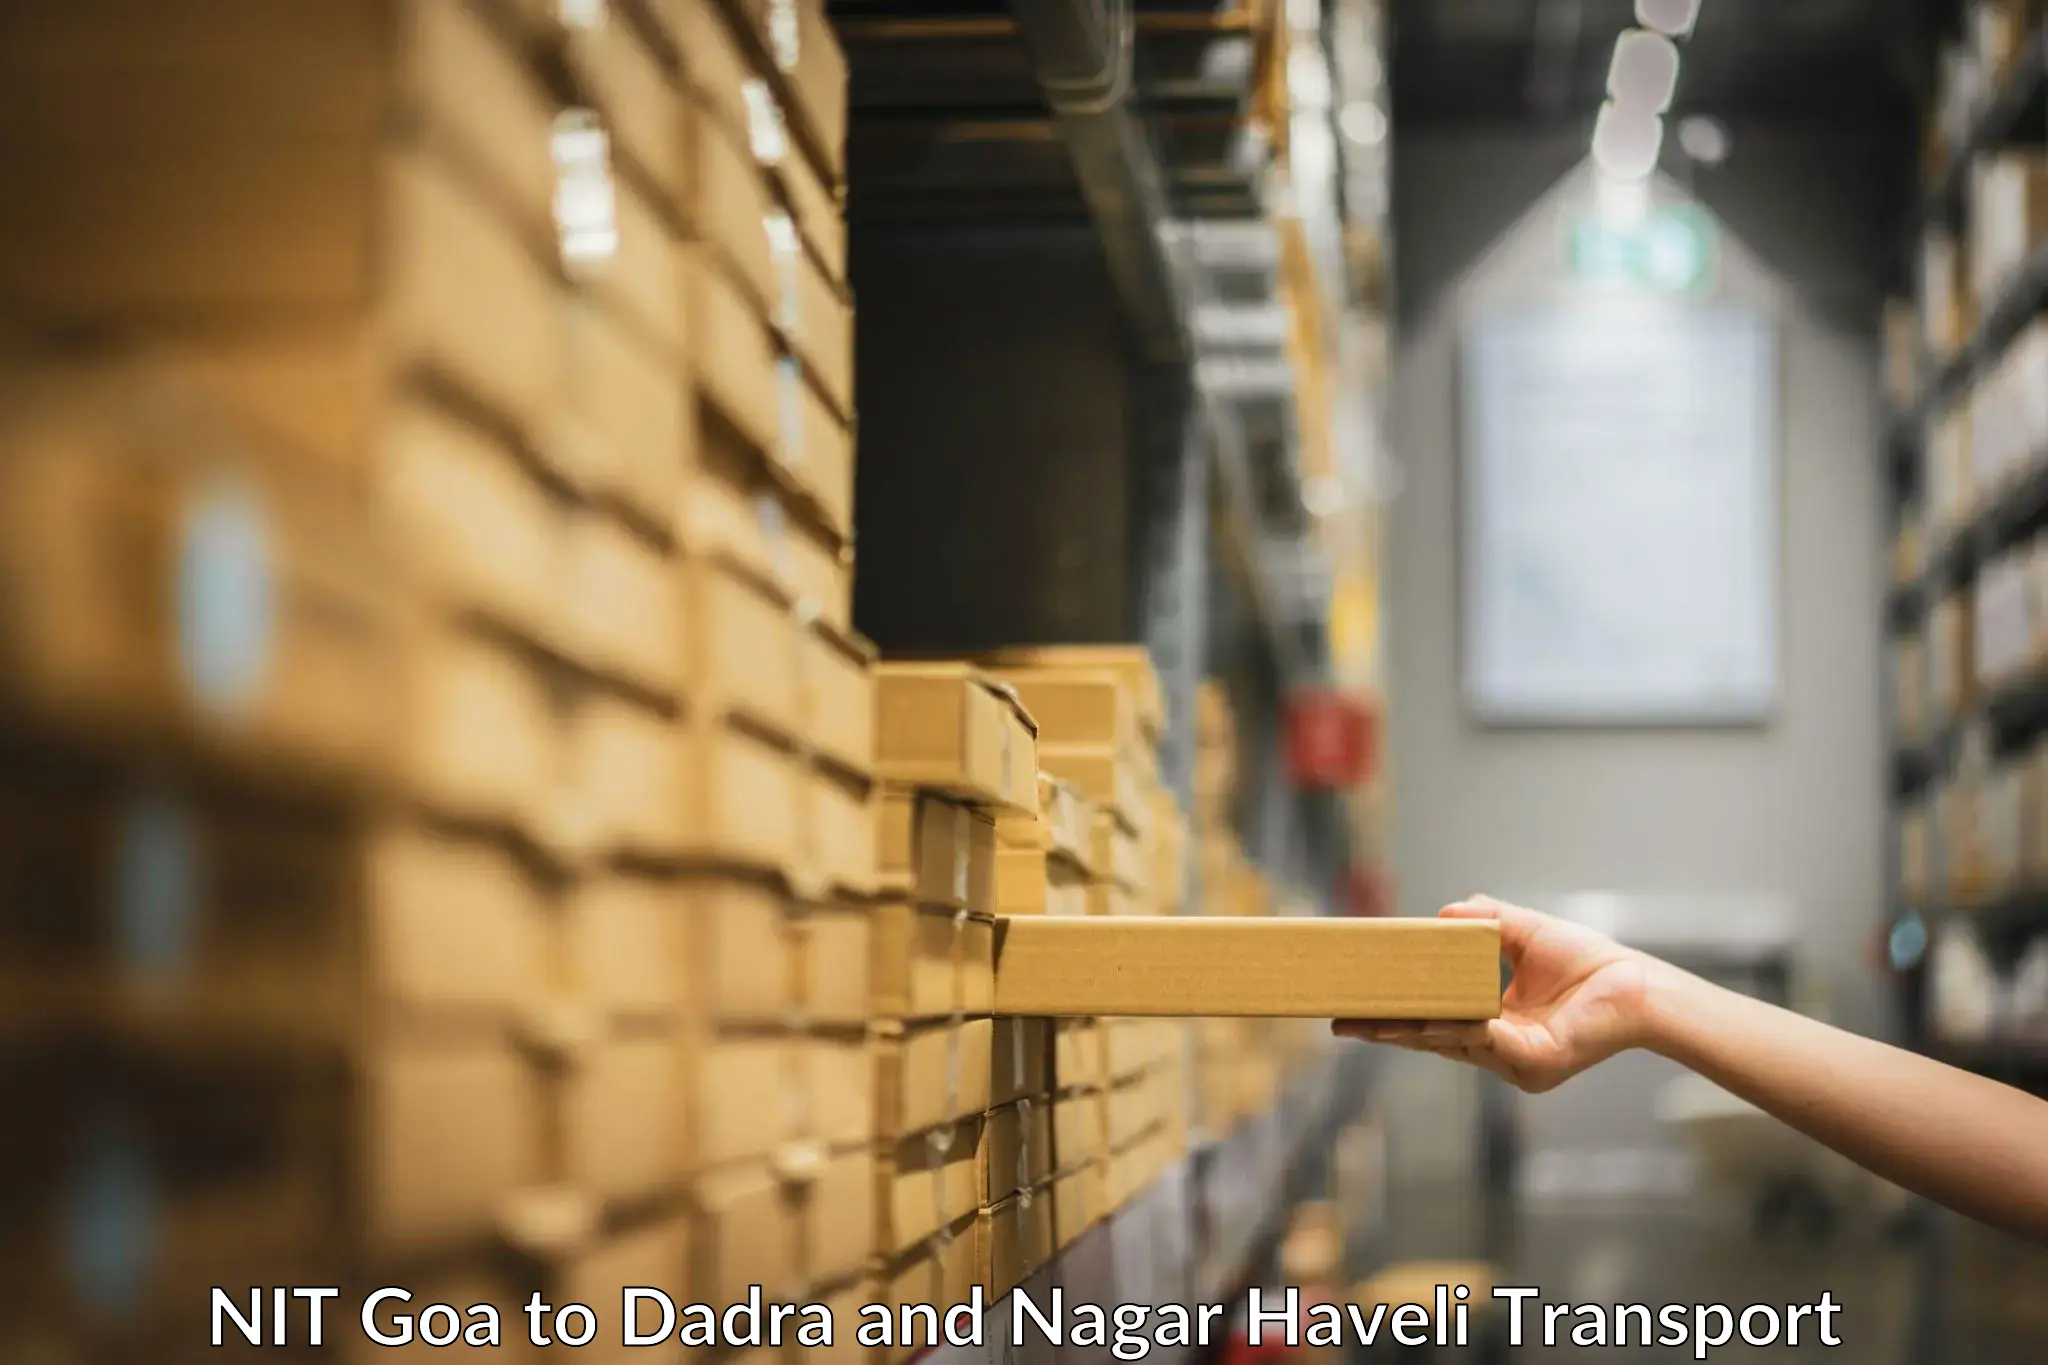 Delivery service NIT Goa to Dadra and Nagar Haveli